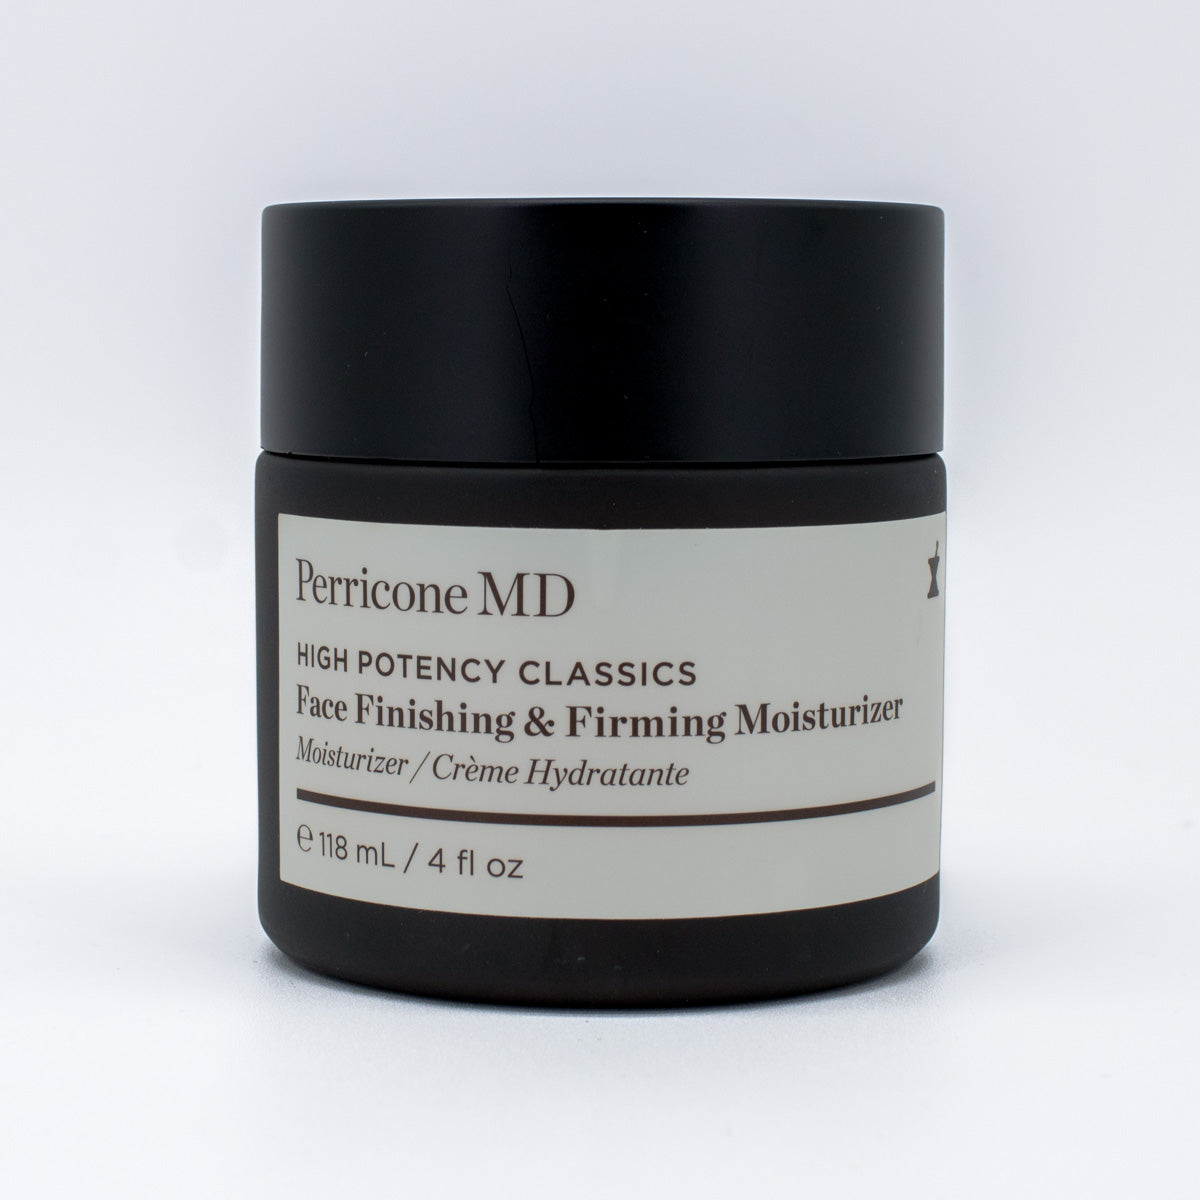 Perricone MD High Potency Classics Face Finishing & Firming Moisturizer 4oz - Damaged Lid